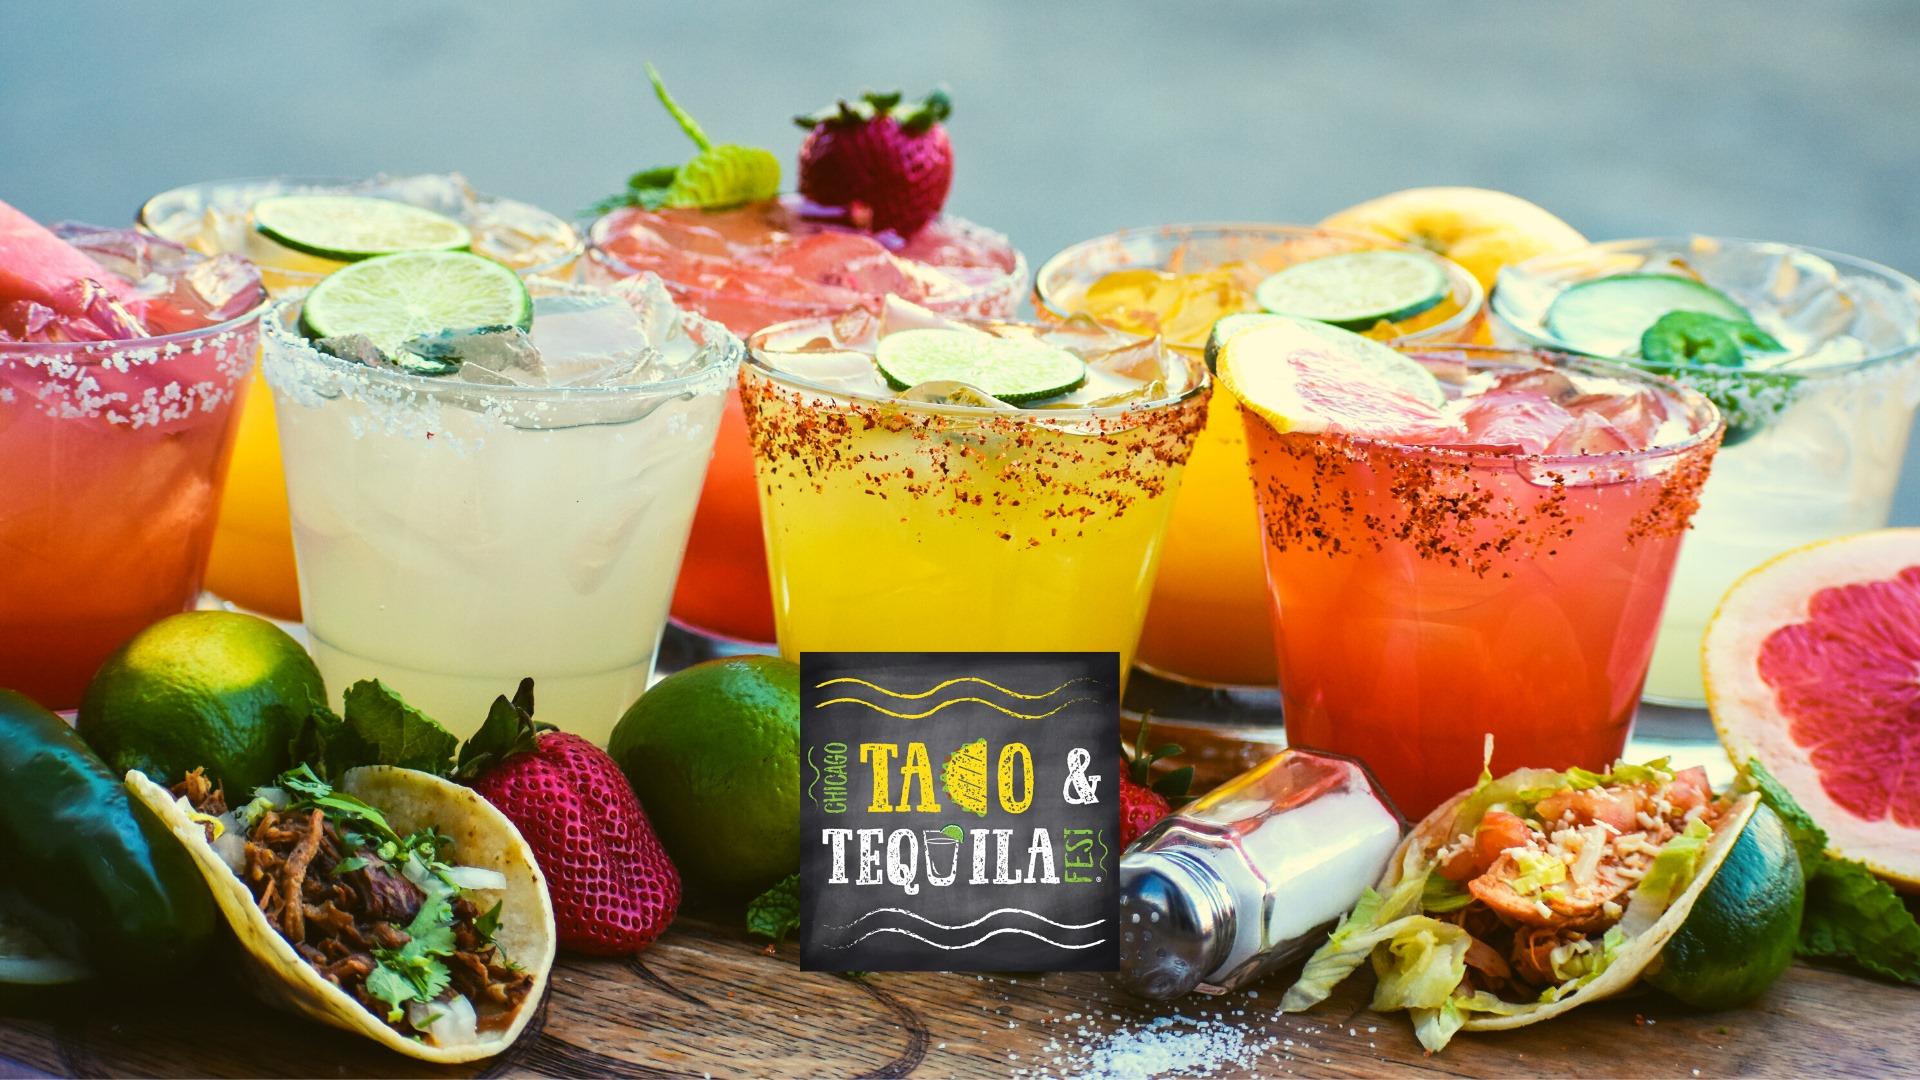 Chicago Taco & Tequila Fest 29 AUG 2020